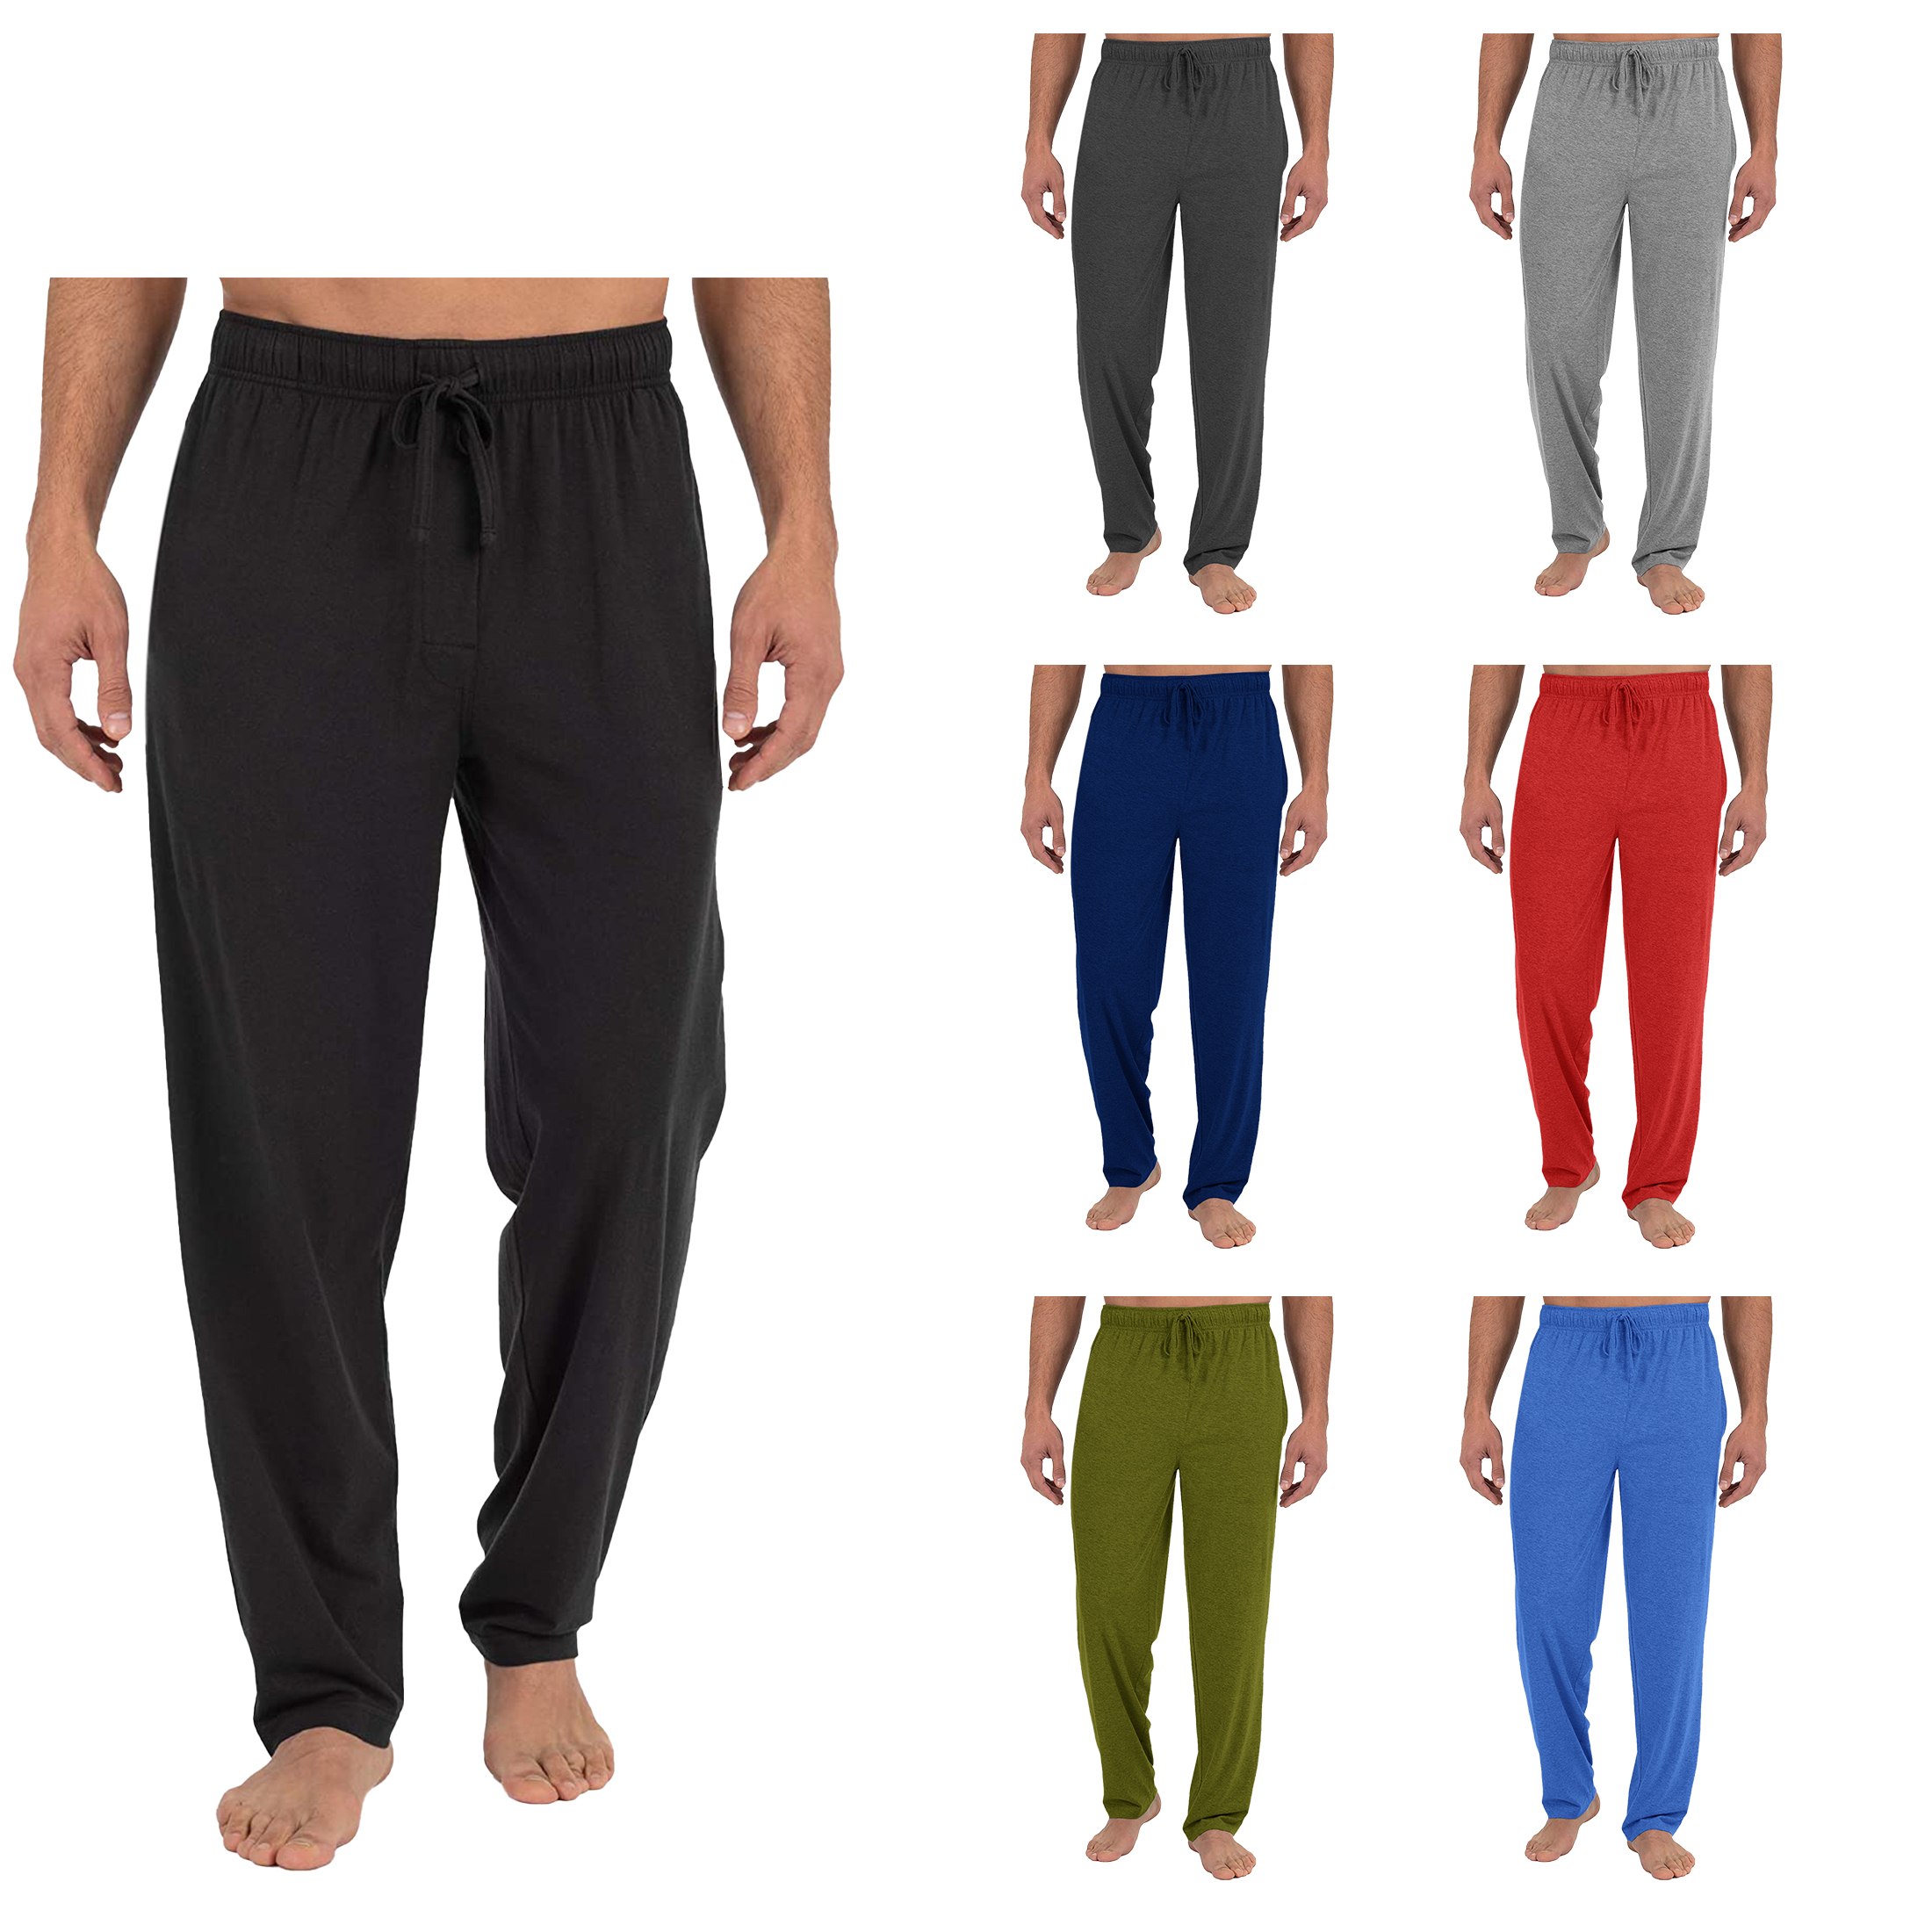 3-Pack Men's Solid Sleep Pajama Pants With Drawstring Jersey Knit Soft Straight-Fit Lounge Trousers - XL